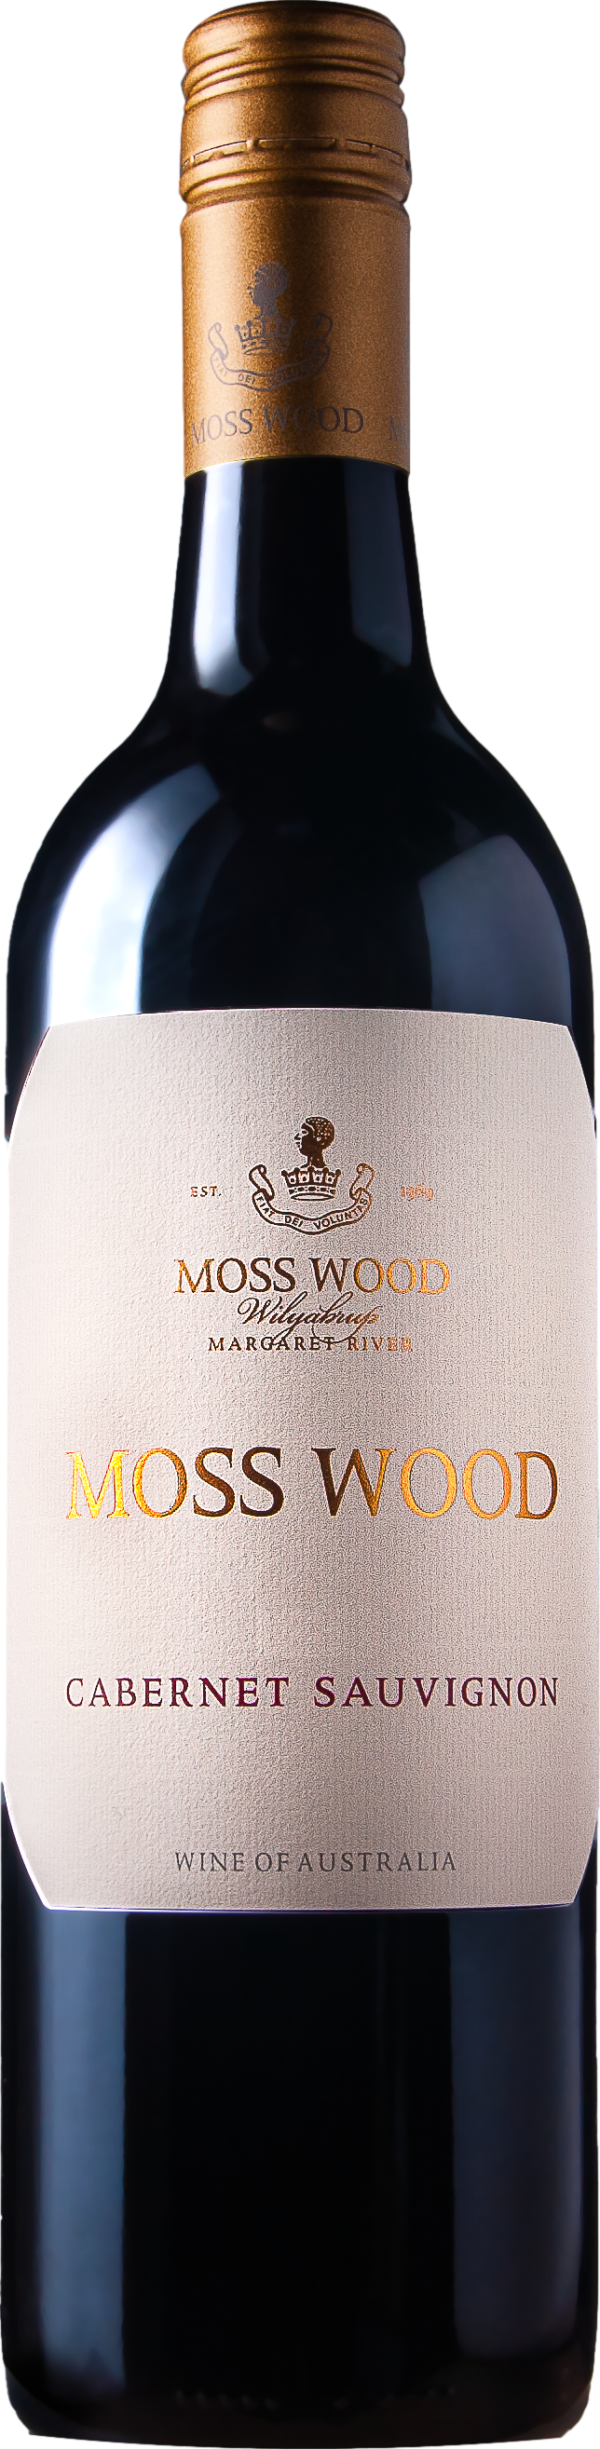 Product image of Moss Wood Cabernet Sauvignon 2019 from 8wines